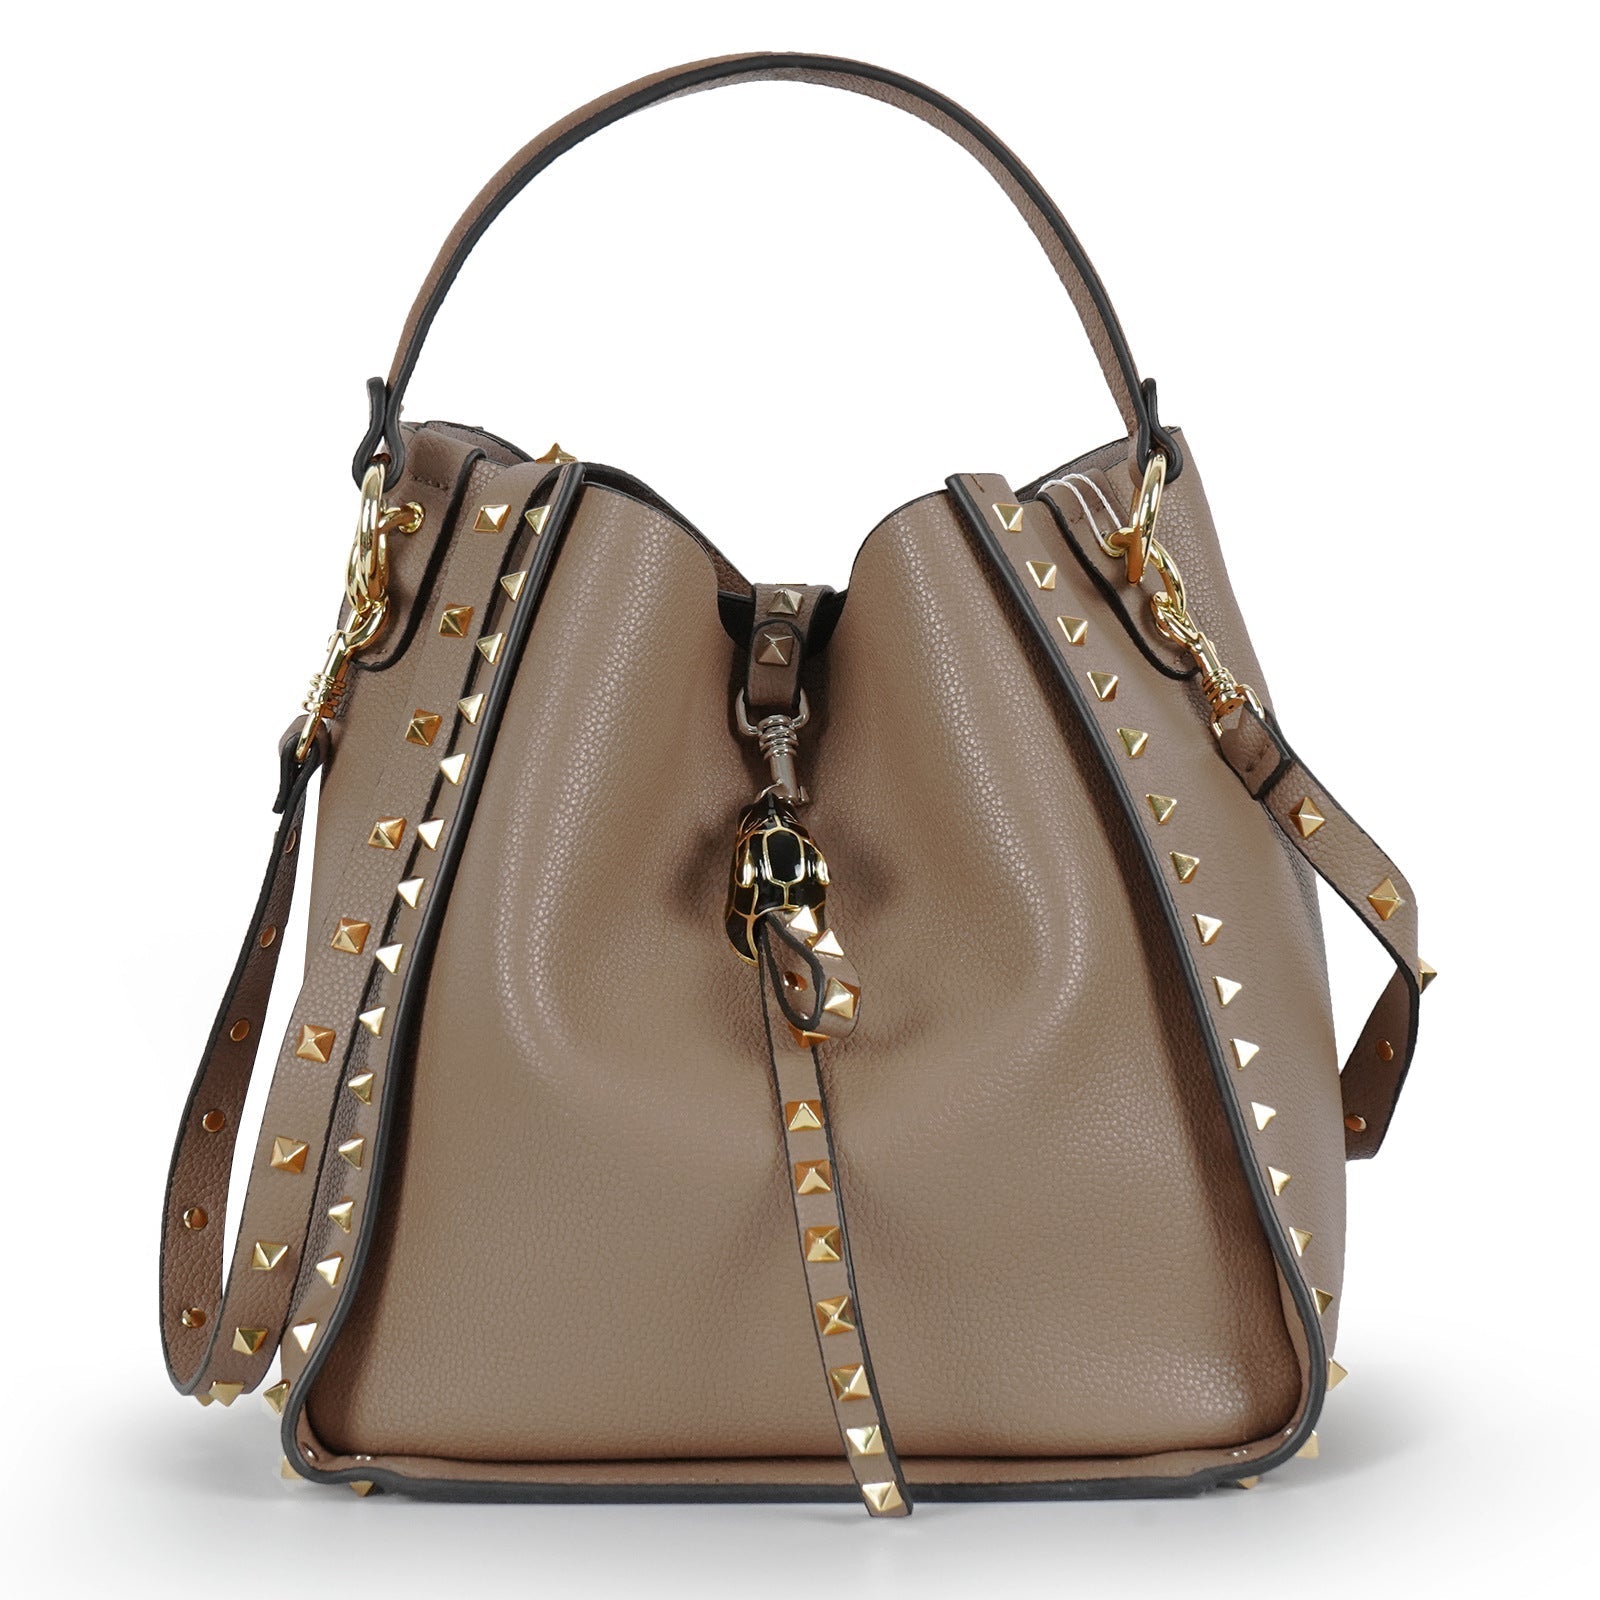 Sophisticated Tote adorned with Chic Rivet Details woyaza